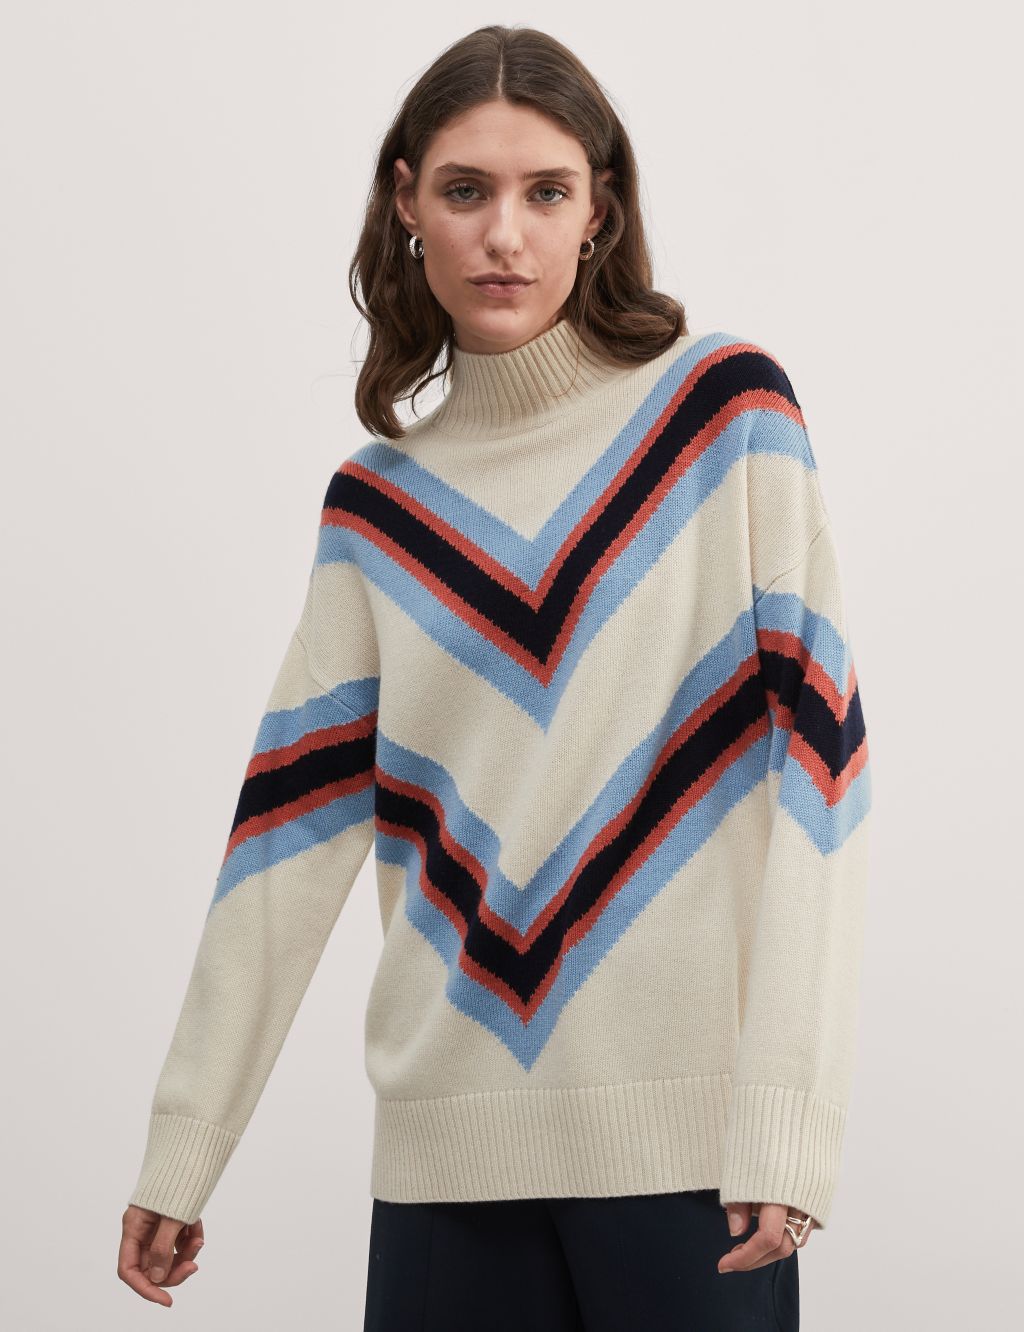 Wool Rich Striped Jumper with Cashmere image 5